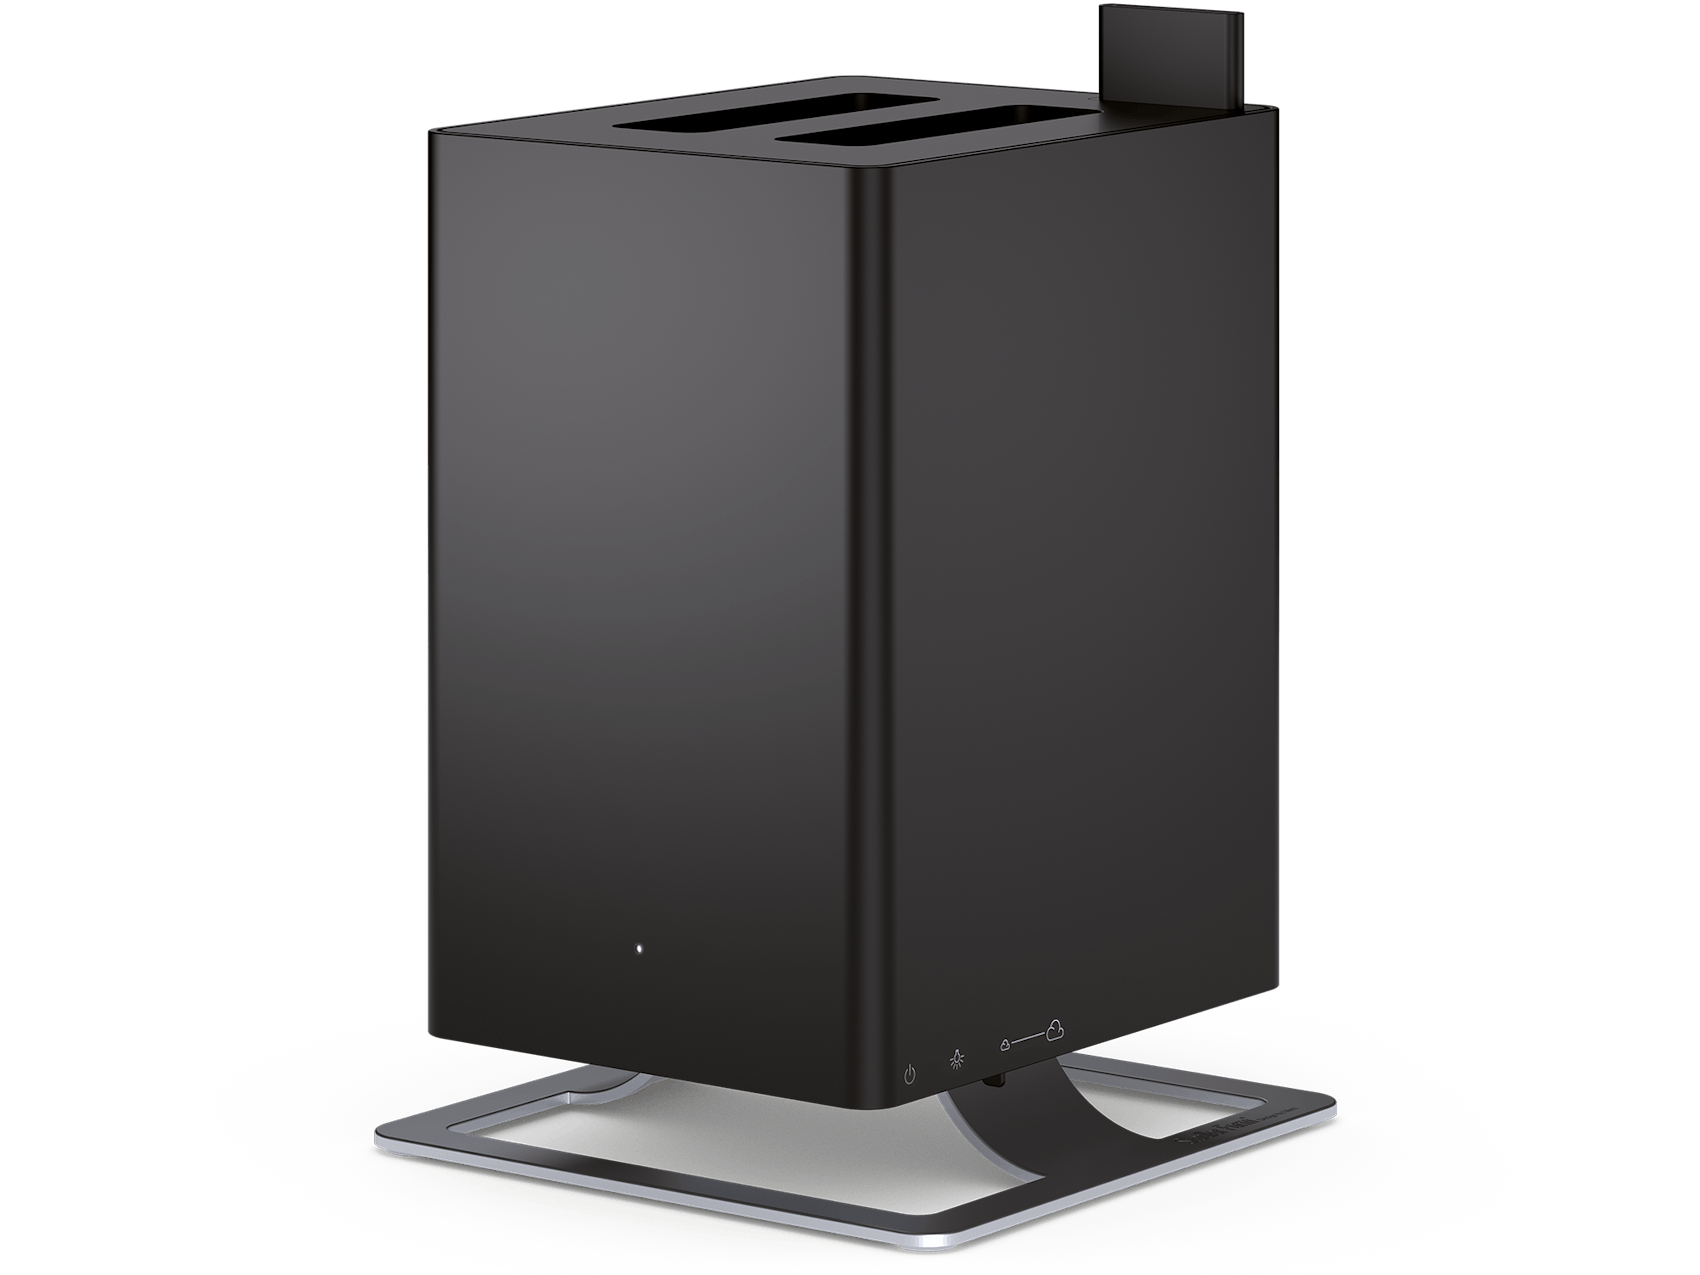 Anton humidifier by Stadler Form in black as perspective view